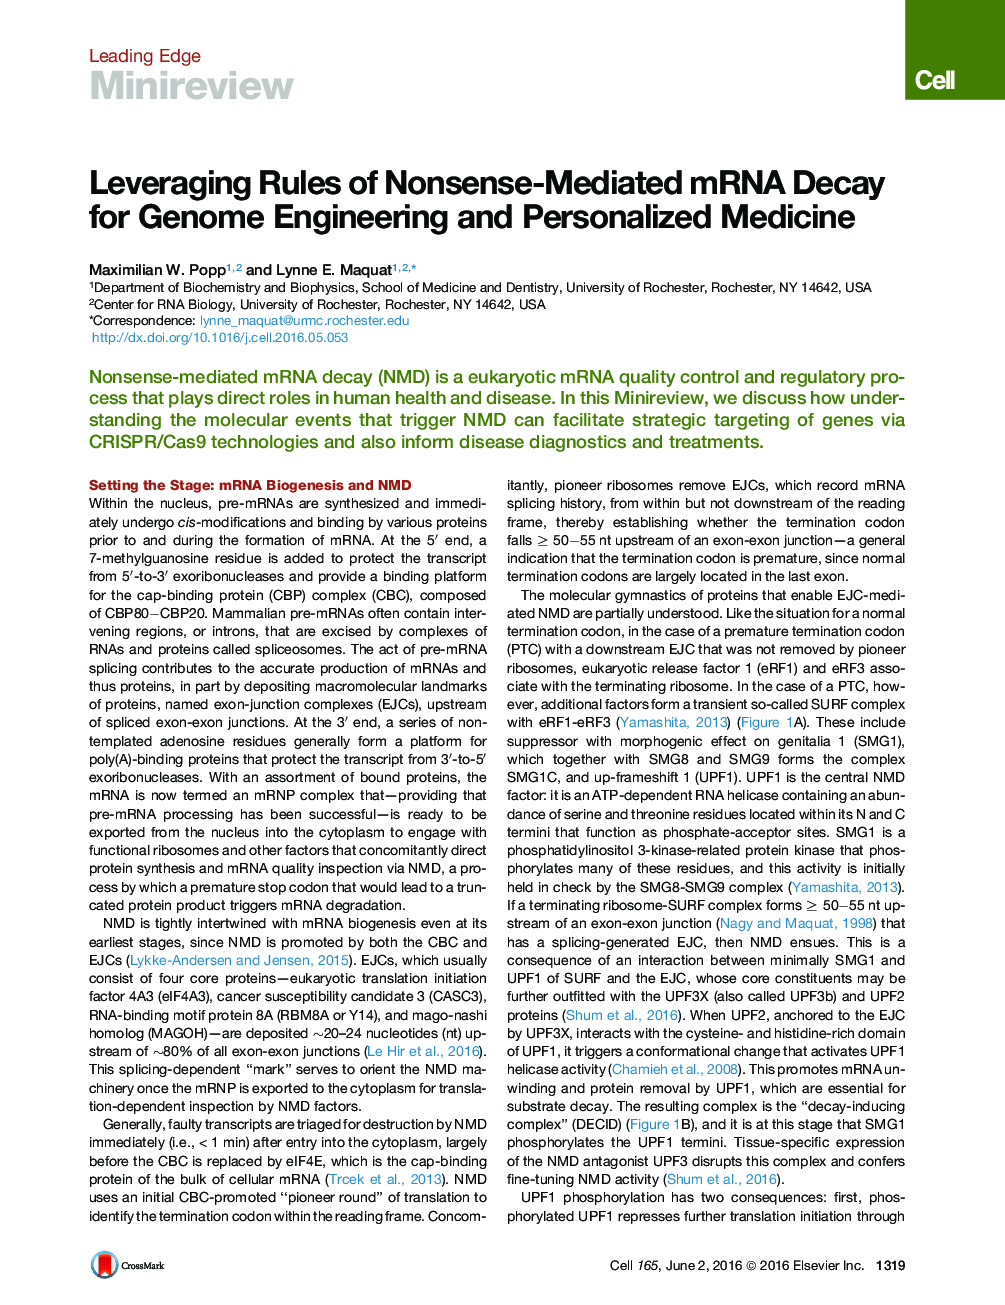 Leveraging Rules of Nonsense-Mediated mRNA Decay for Genome Engineering and Personalized Medicine